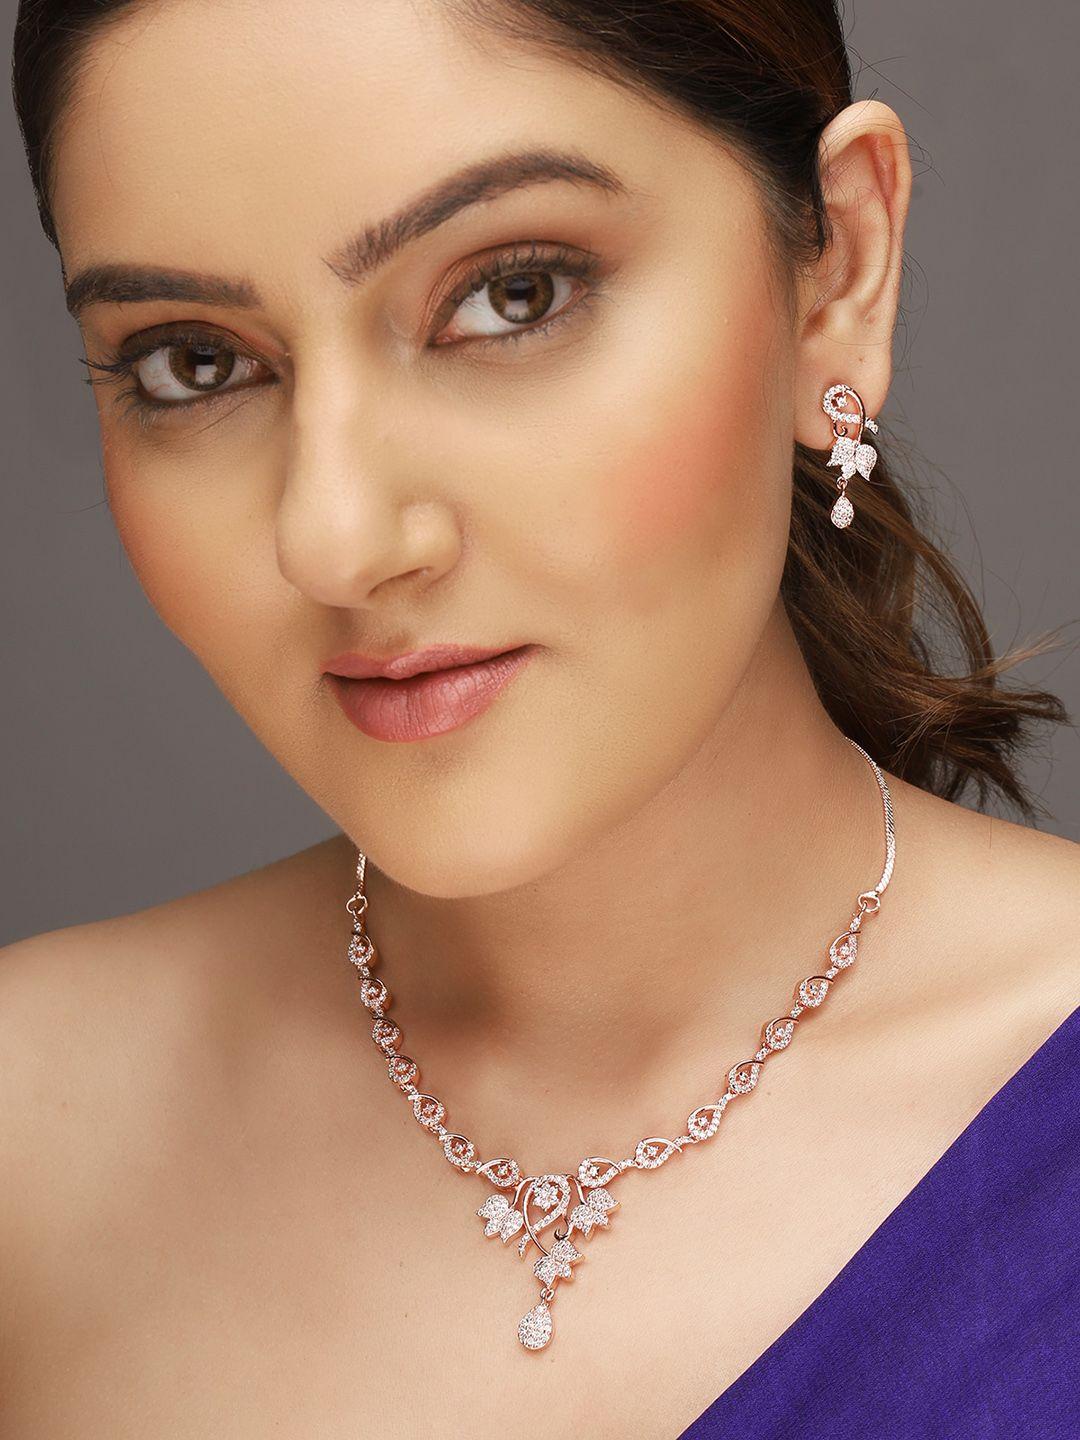 aquastreet rose gold-plated ad-studded necklace & earrings set